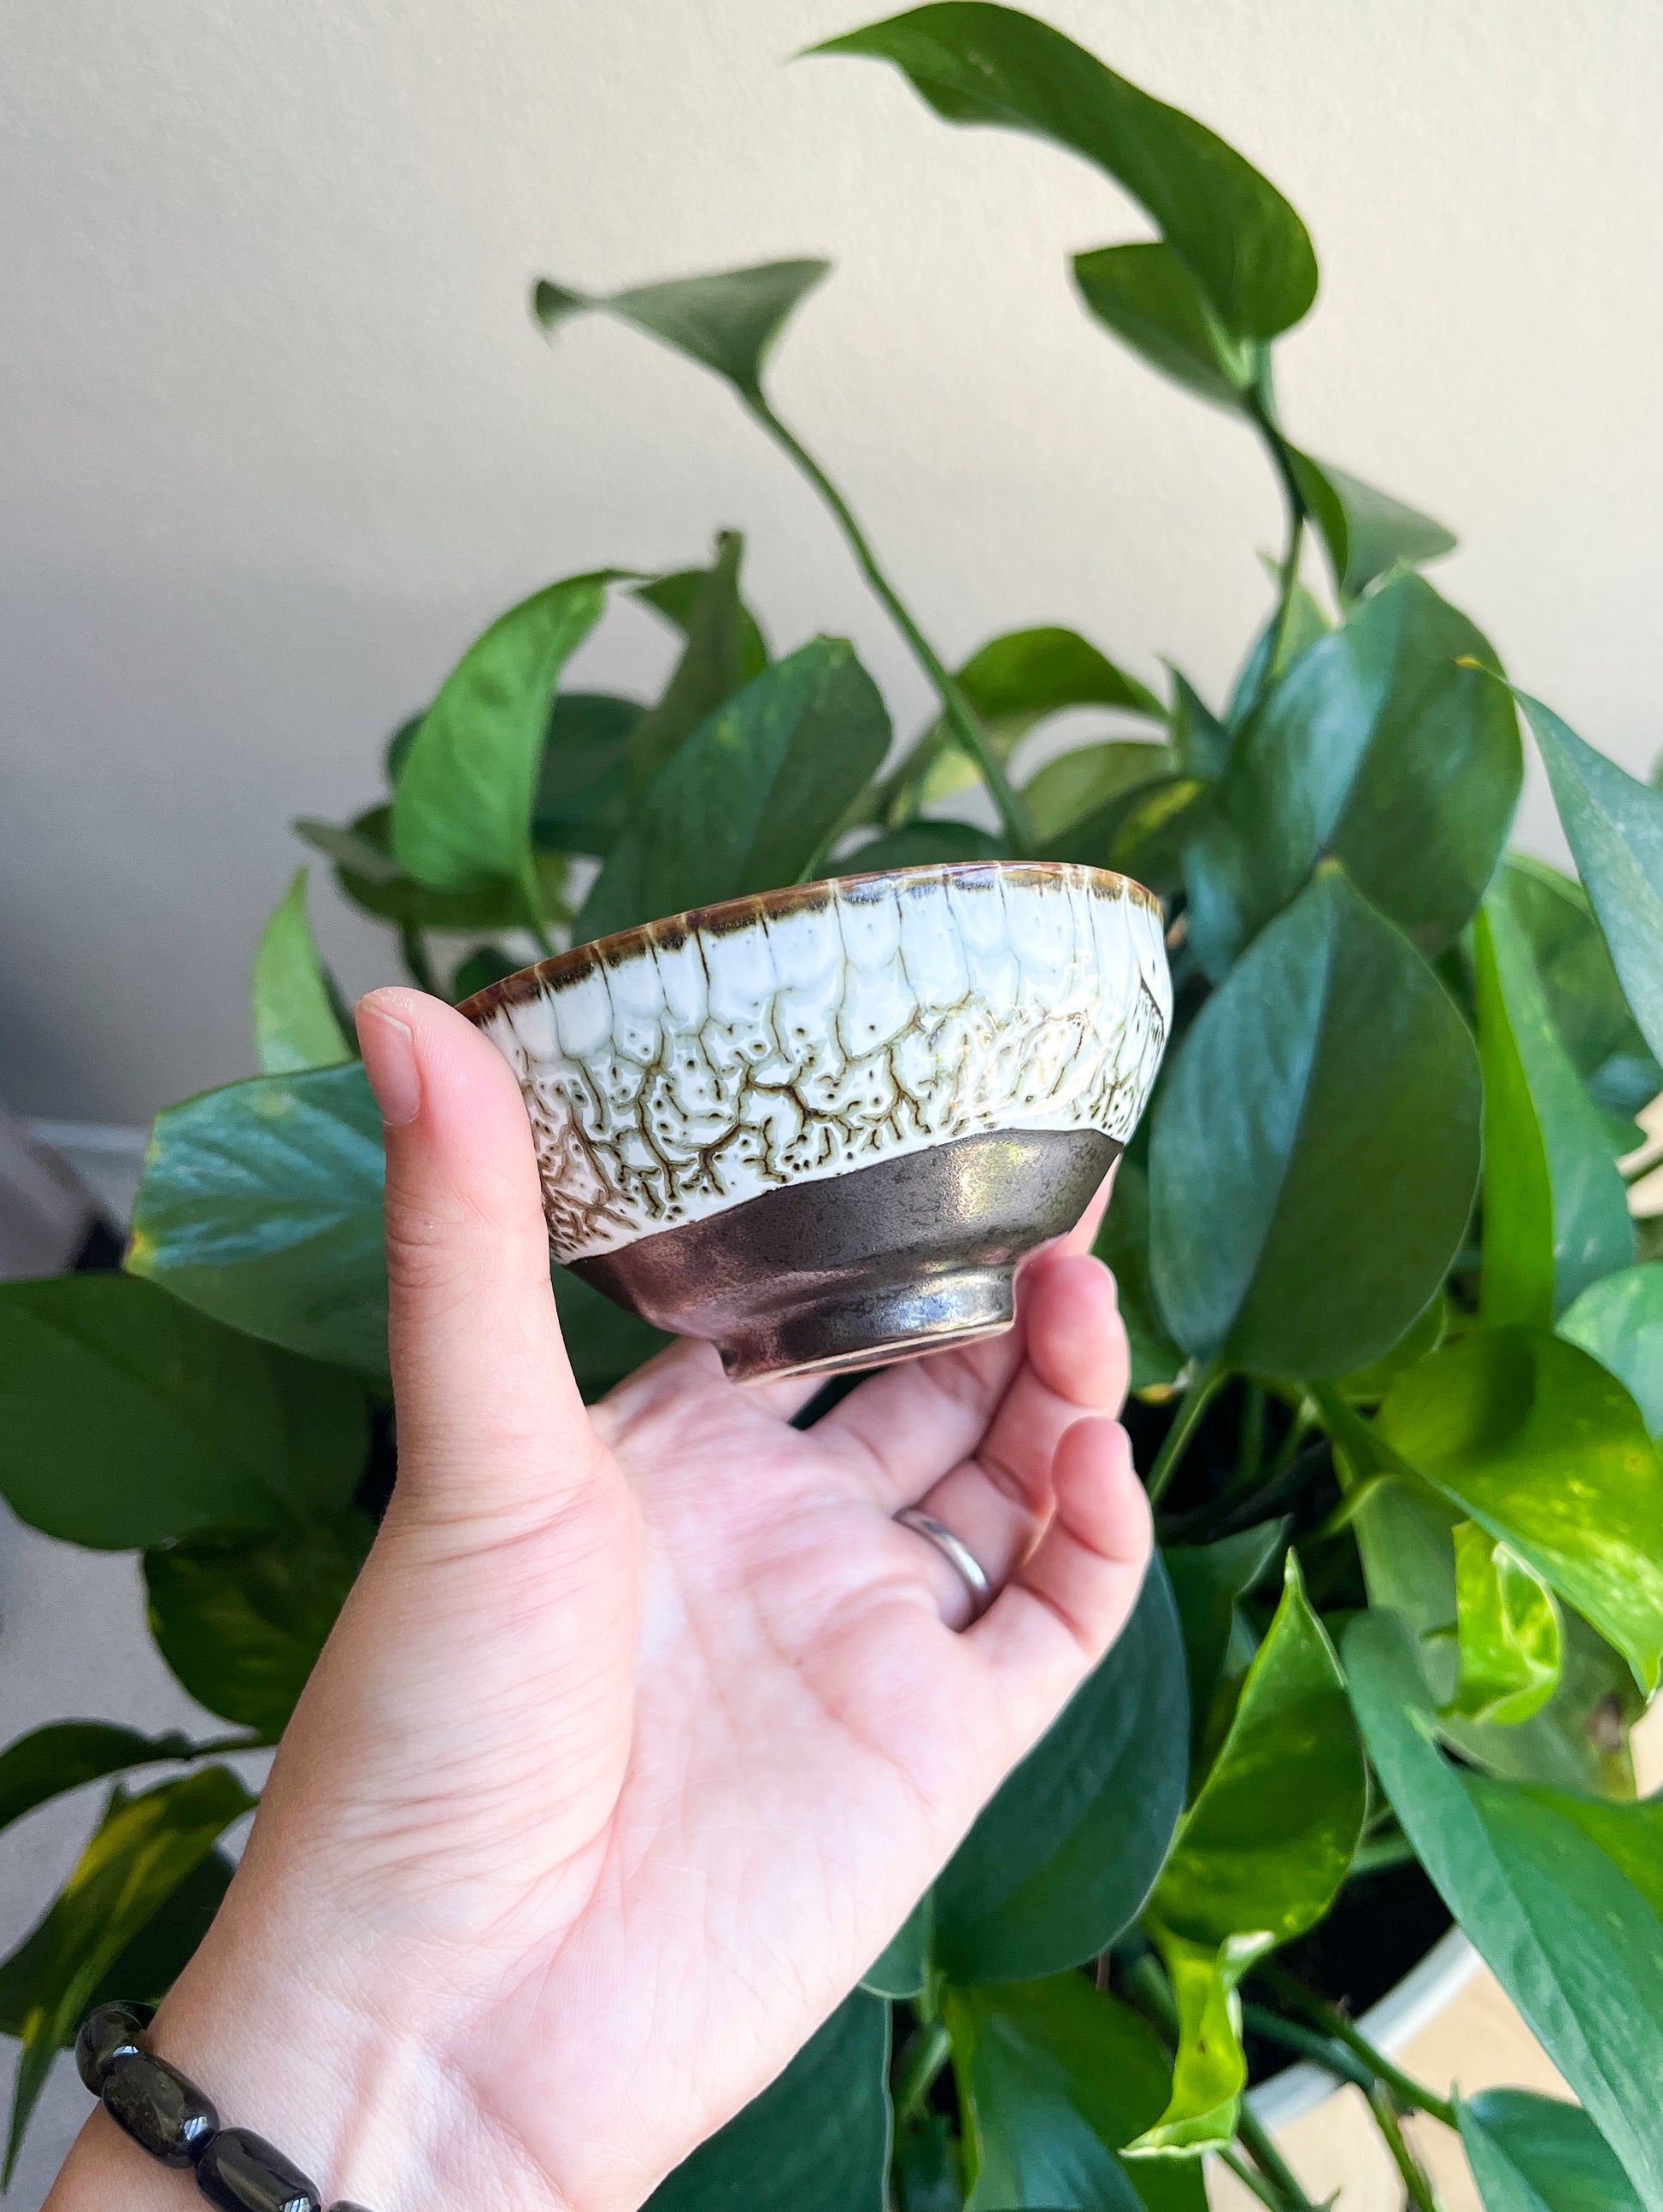 Handcrafted Japanese-Style Matcha Teacup